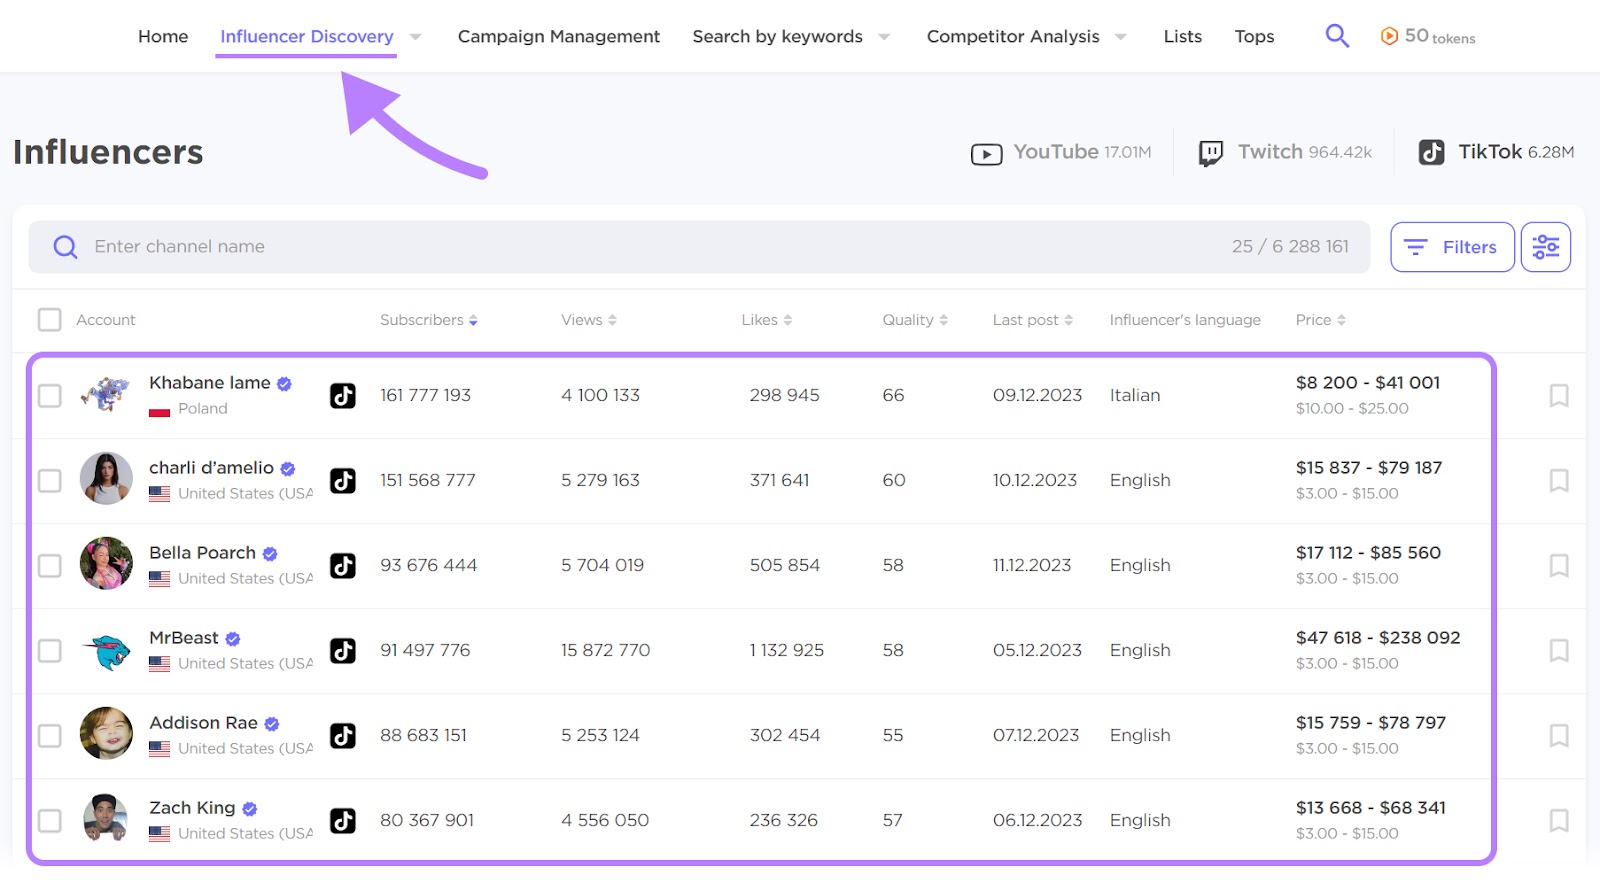 Influencer Discovery page in Influencer Analytics tool